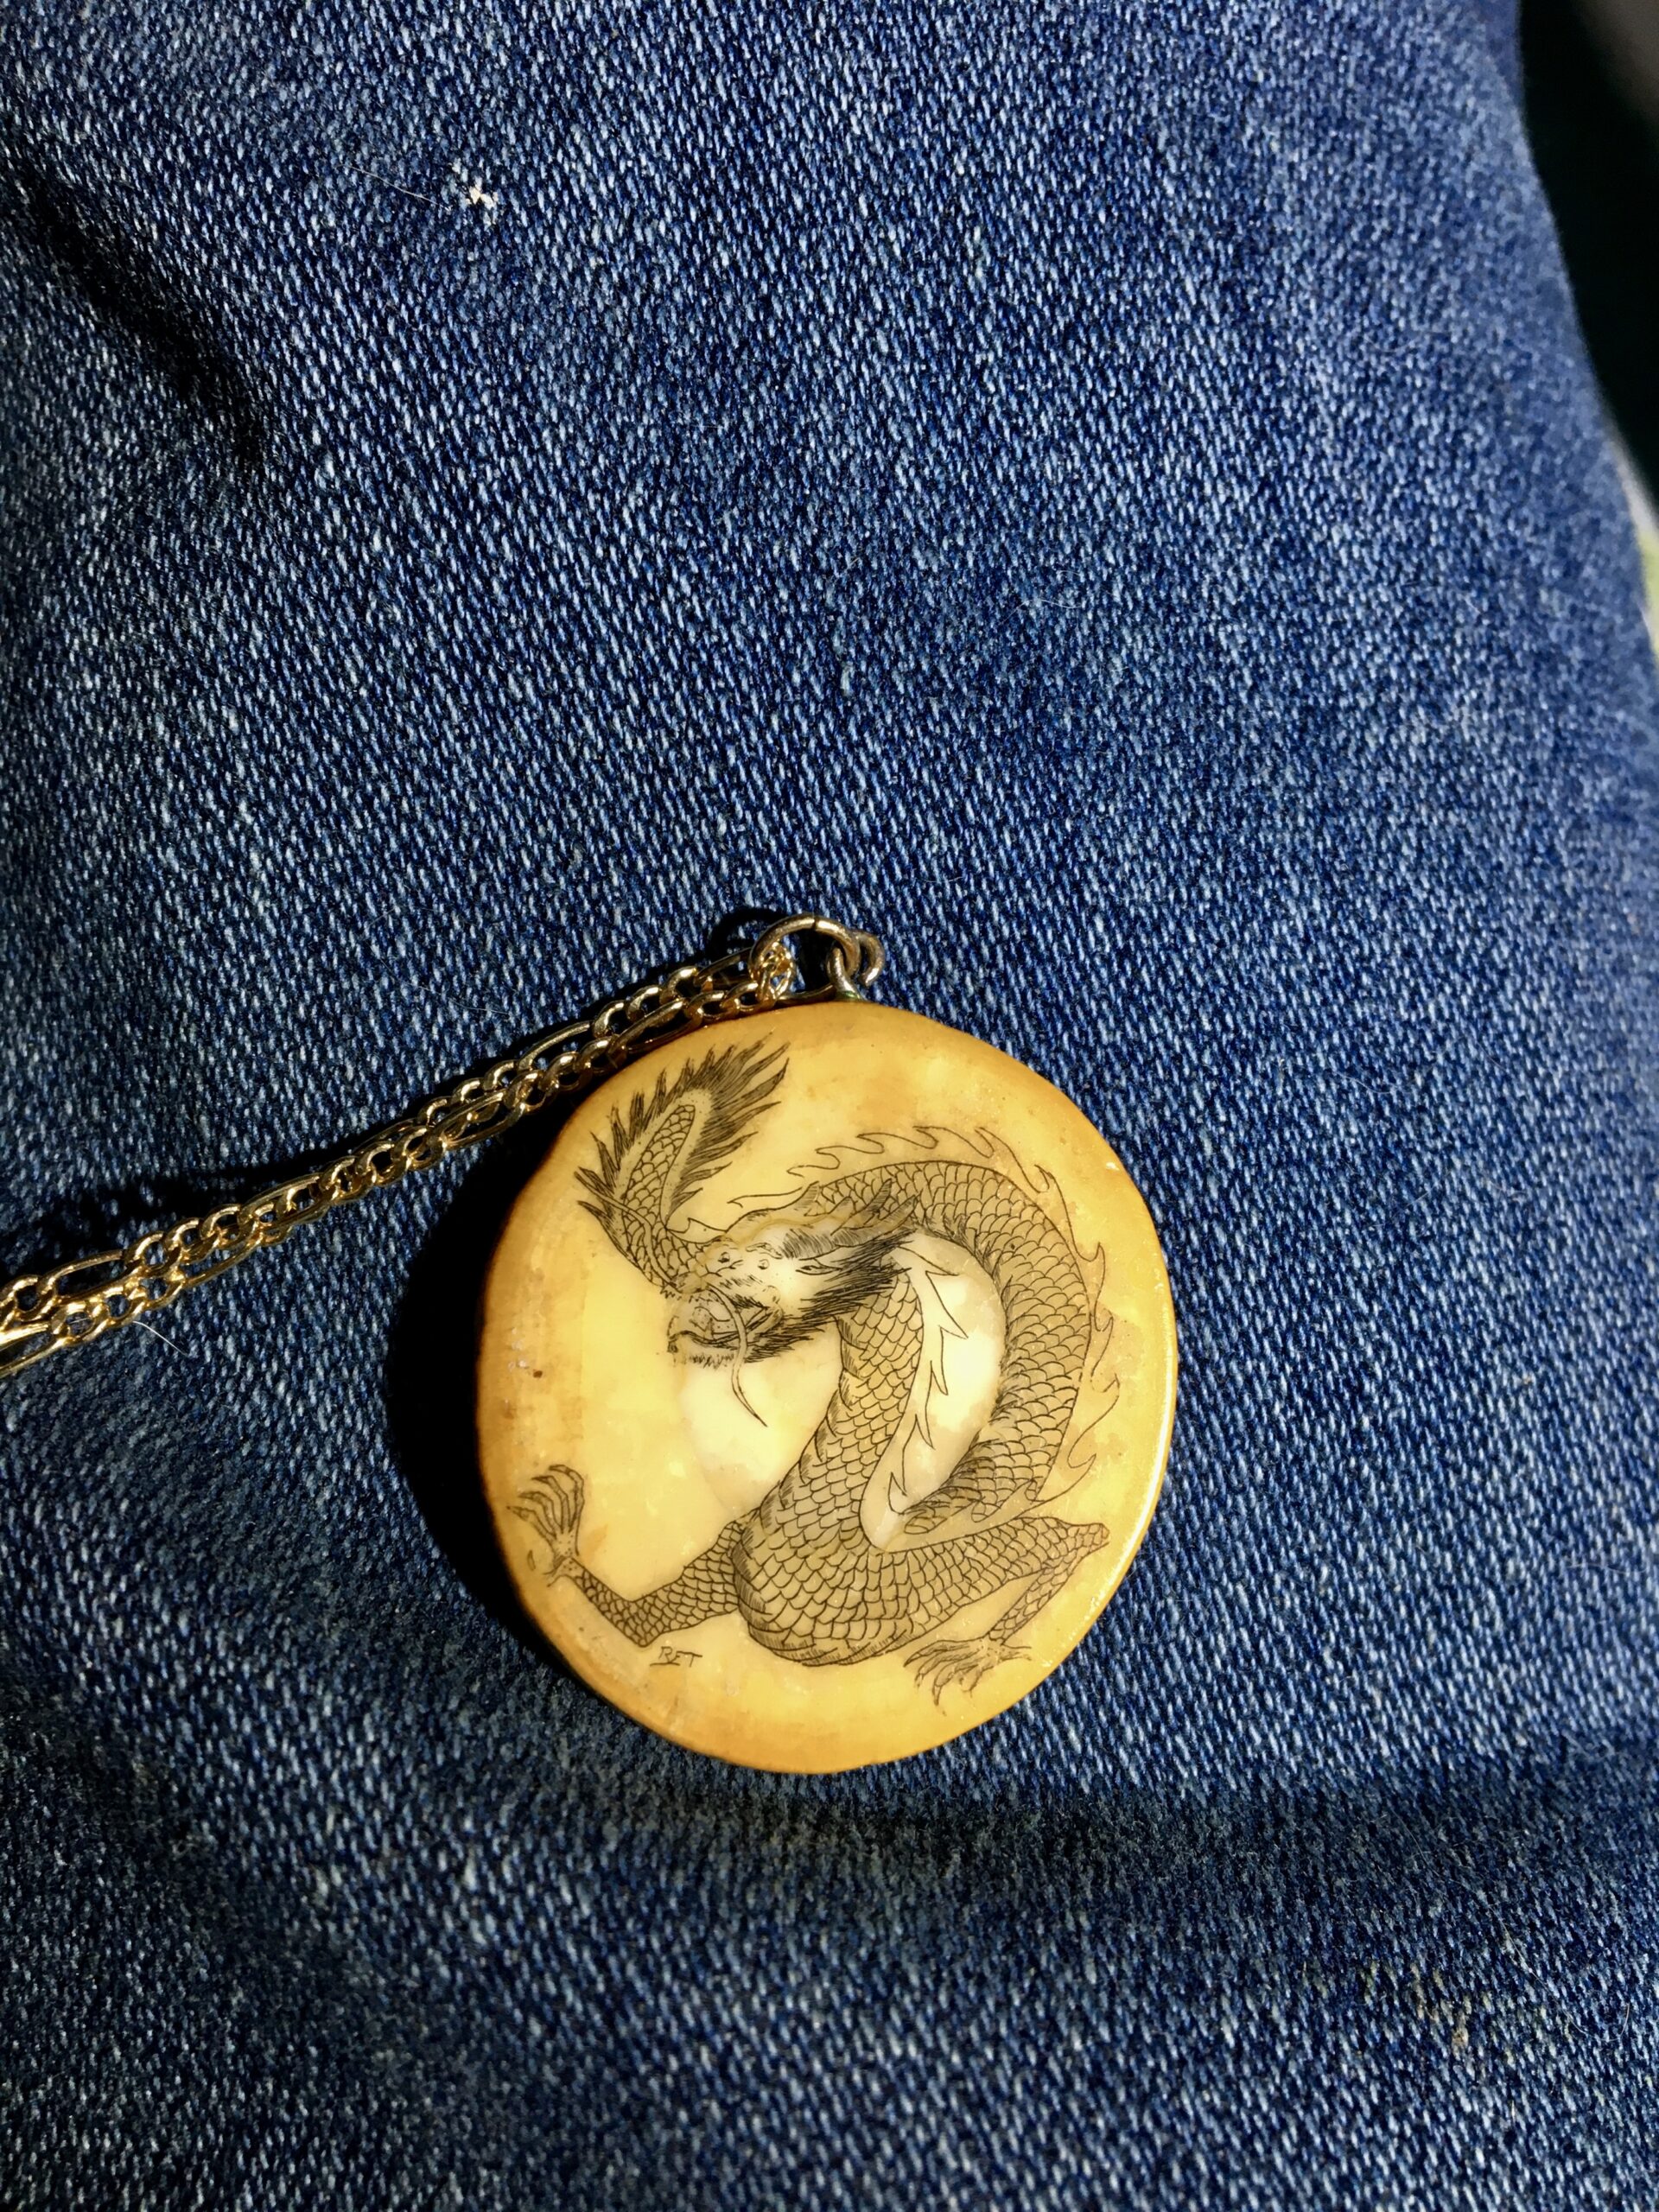 Scrimshaw of a dragon on an ivory disk with a chain attached to the top, photographed on denim